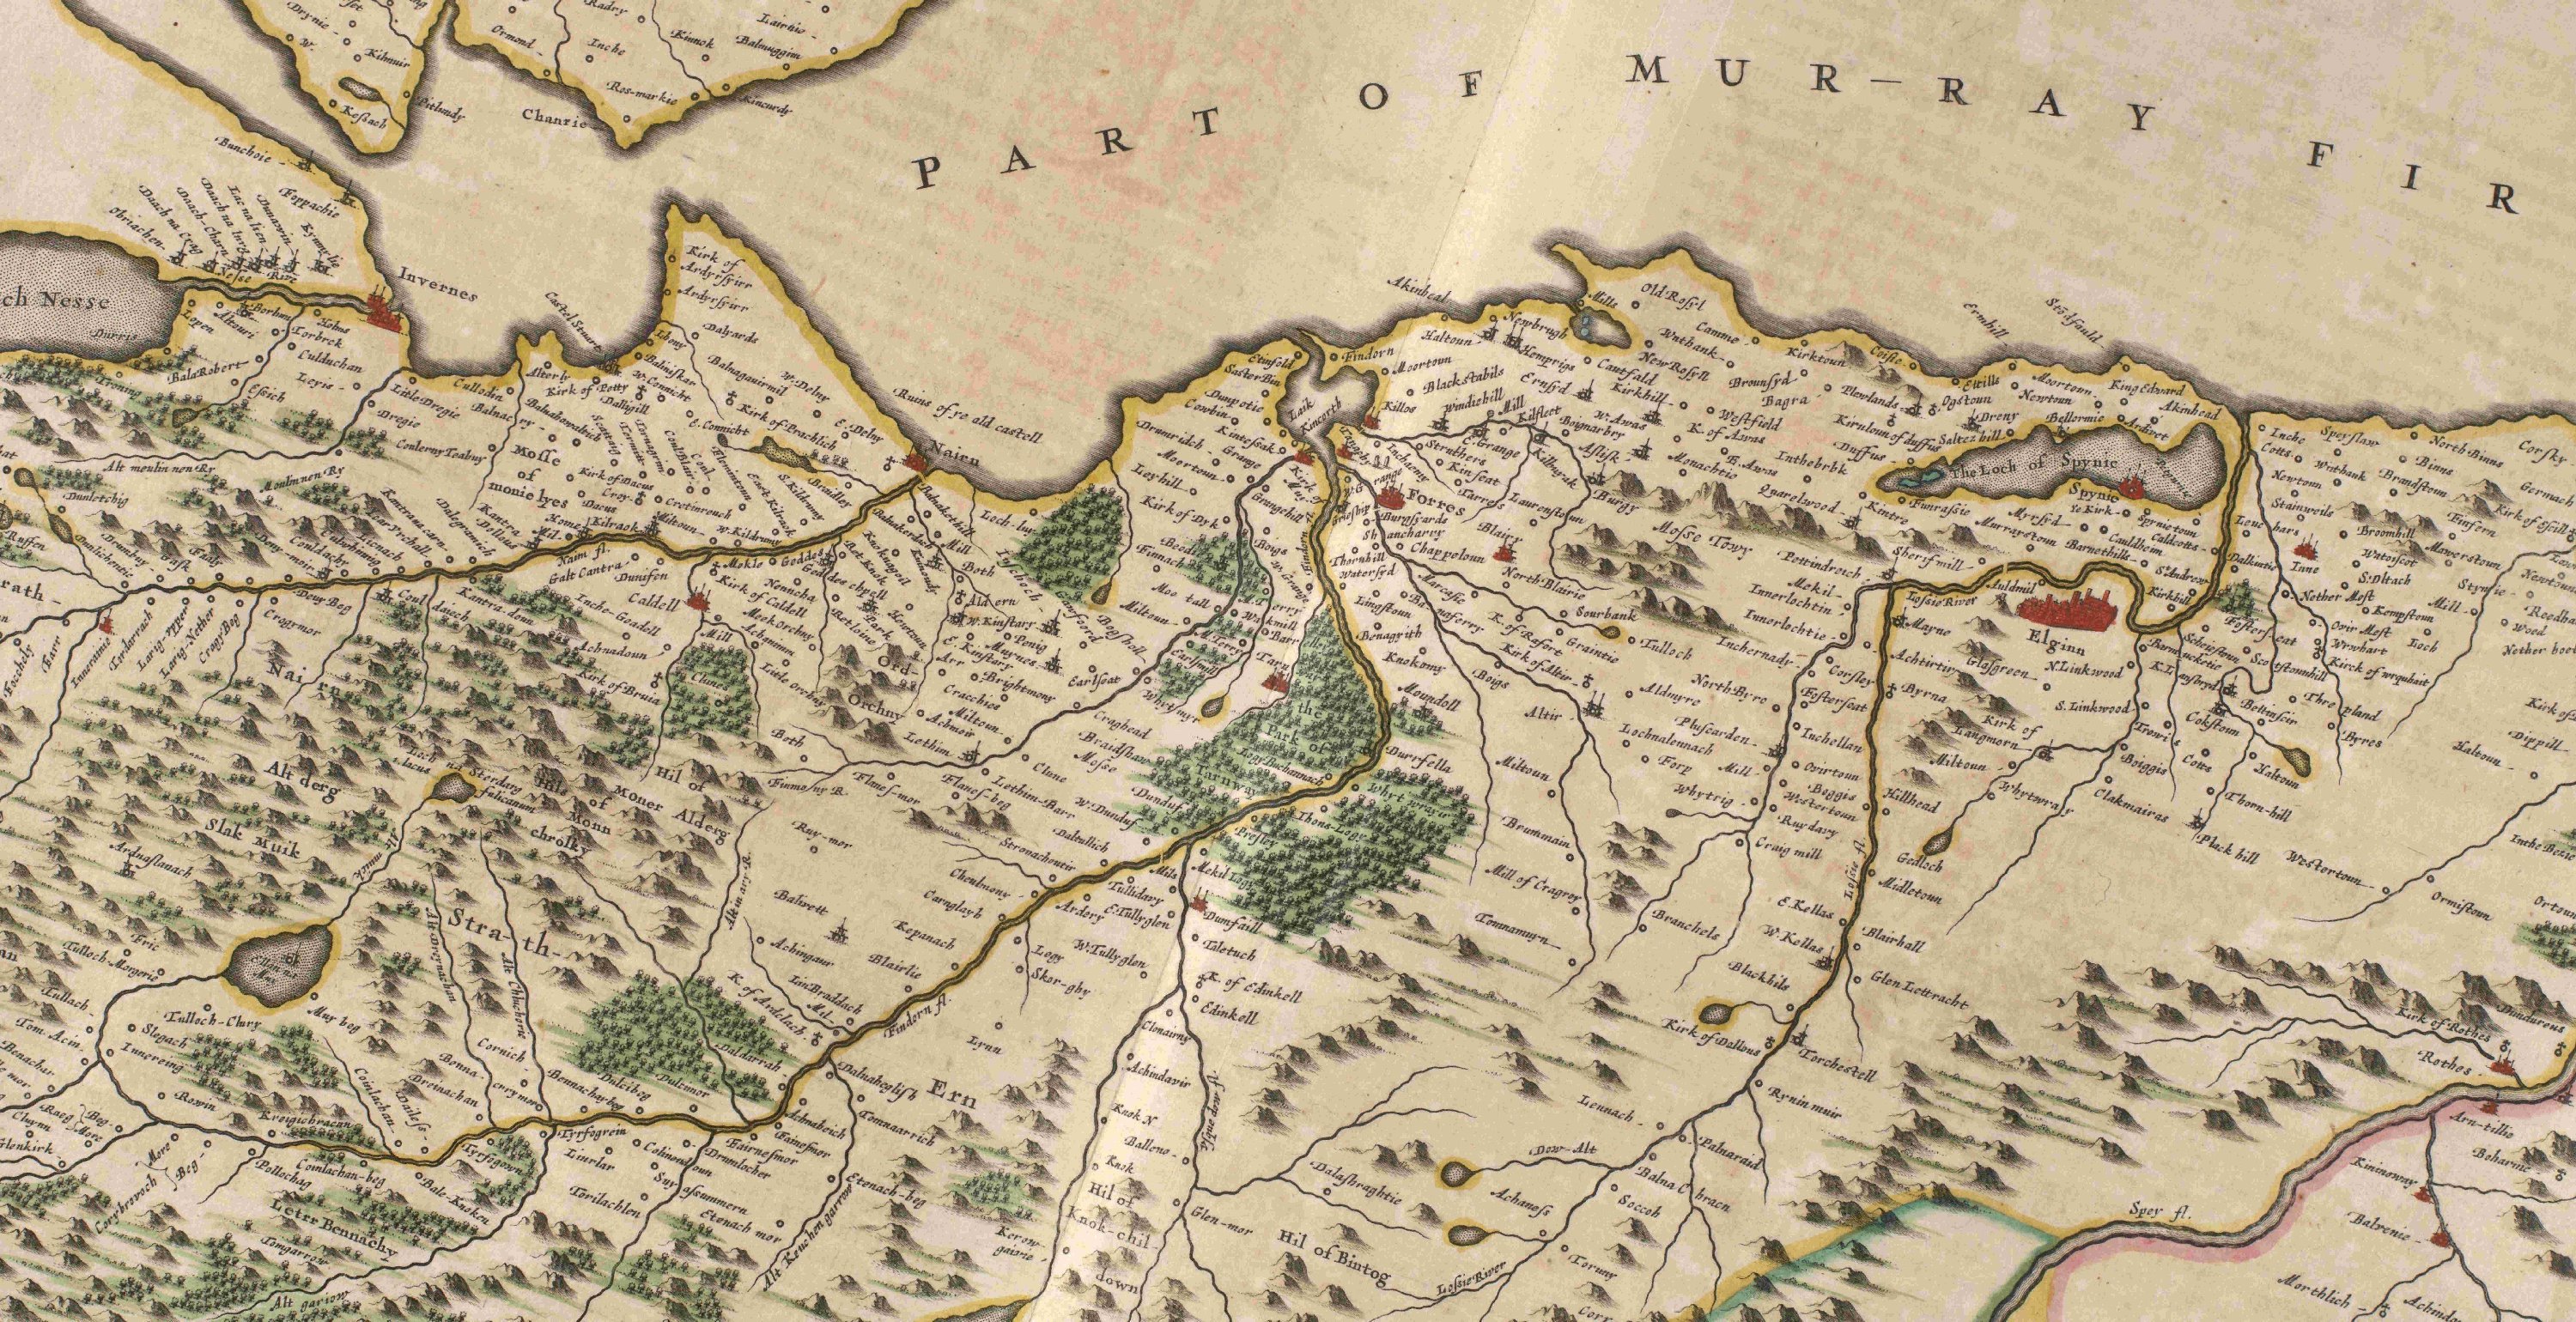 A historical map presenting Scotland, exhibiting its terrain, cities, and significant landmarks.